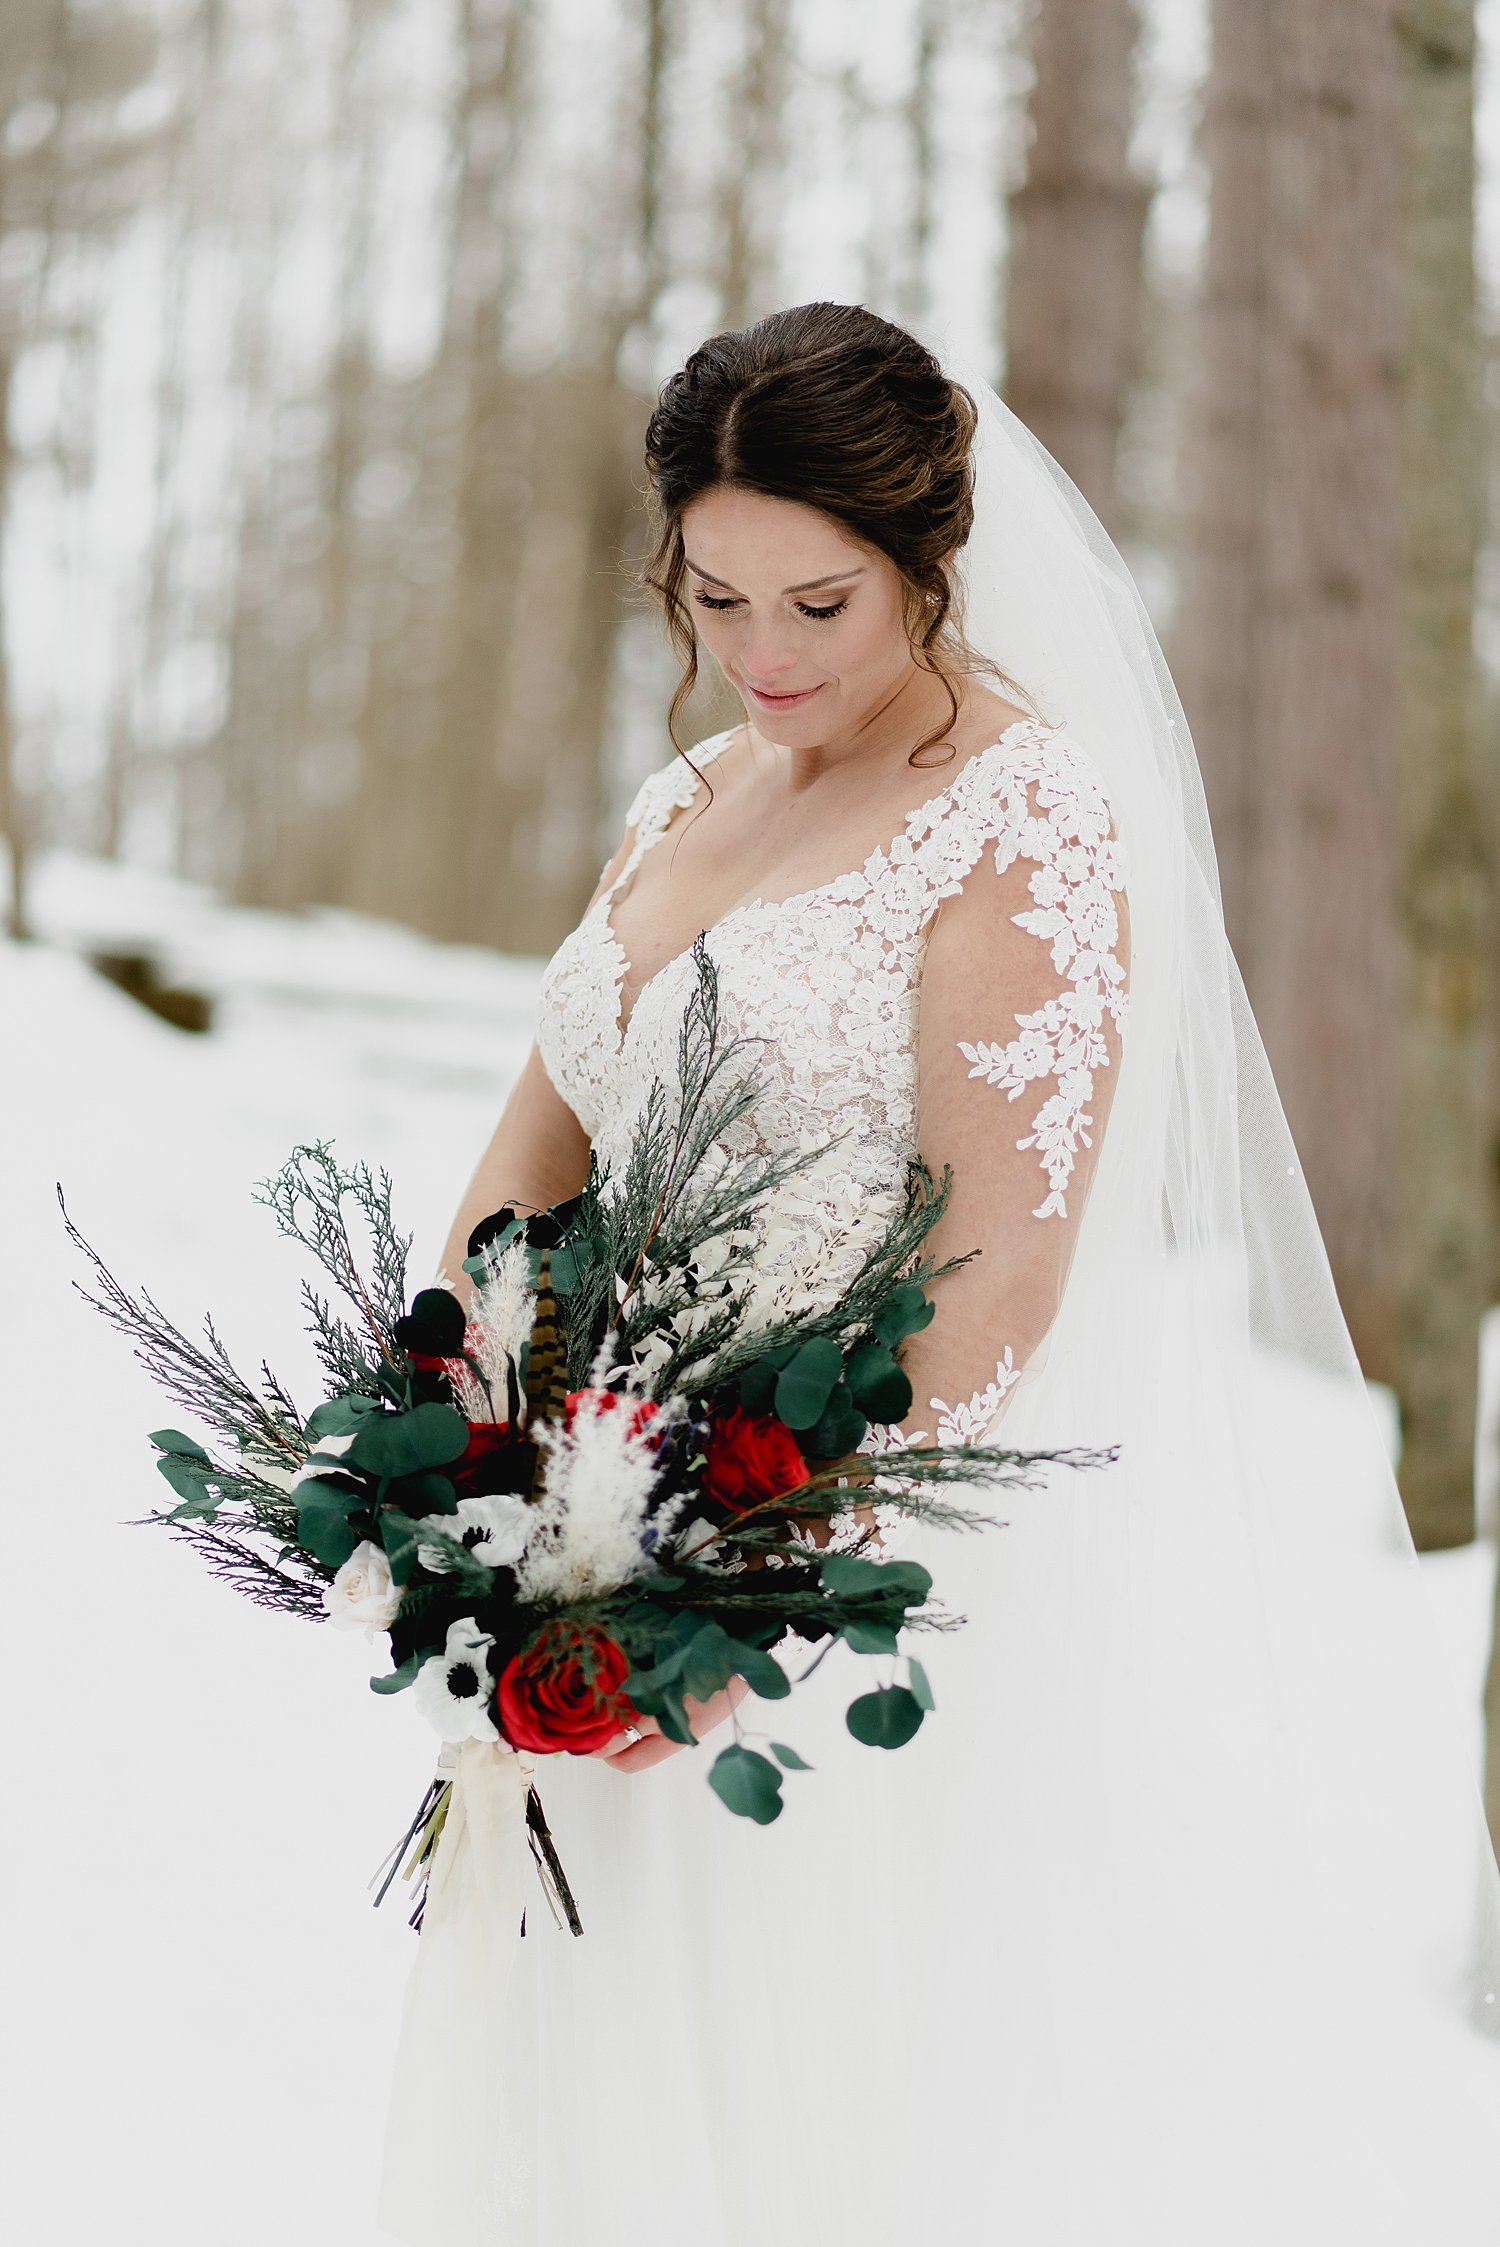 Intimate Winter Elopement at O'Hara Mill Homestead in Madoc, Ontario | Prince Edward County Wedding Photographer | Holly McMurter Photographs_0039.jpg